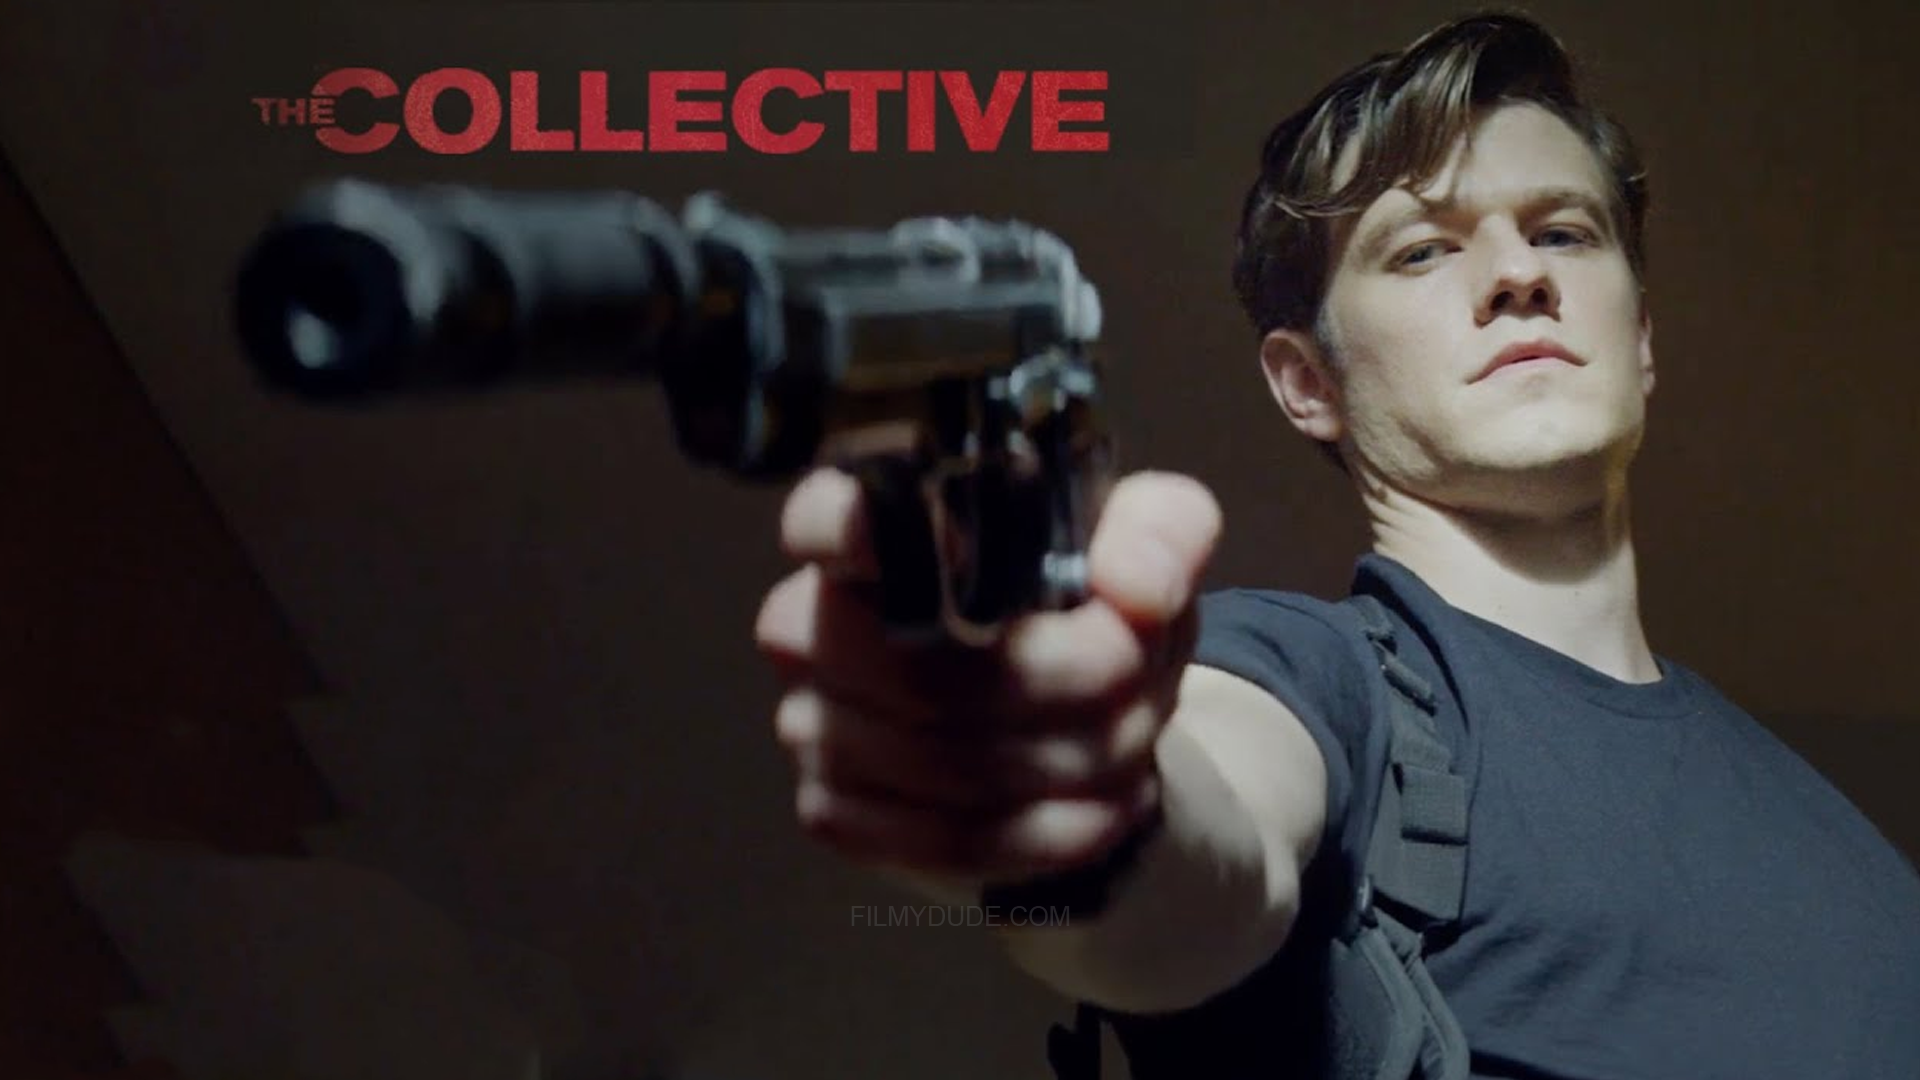 The Collective Trailer Out